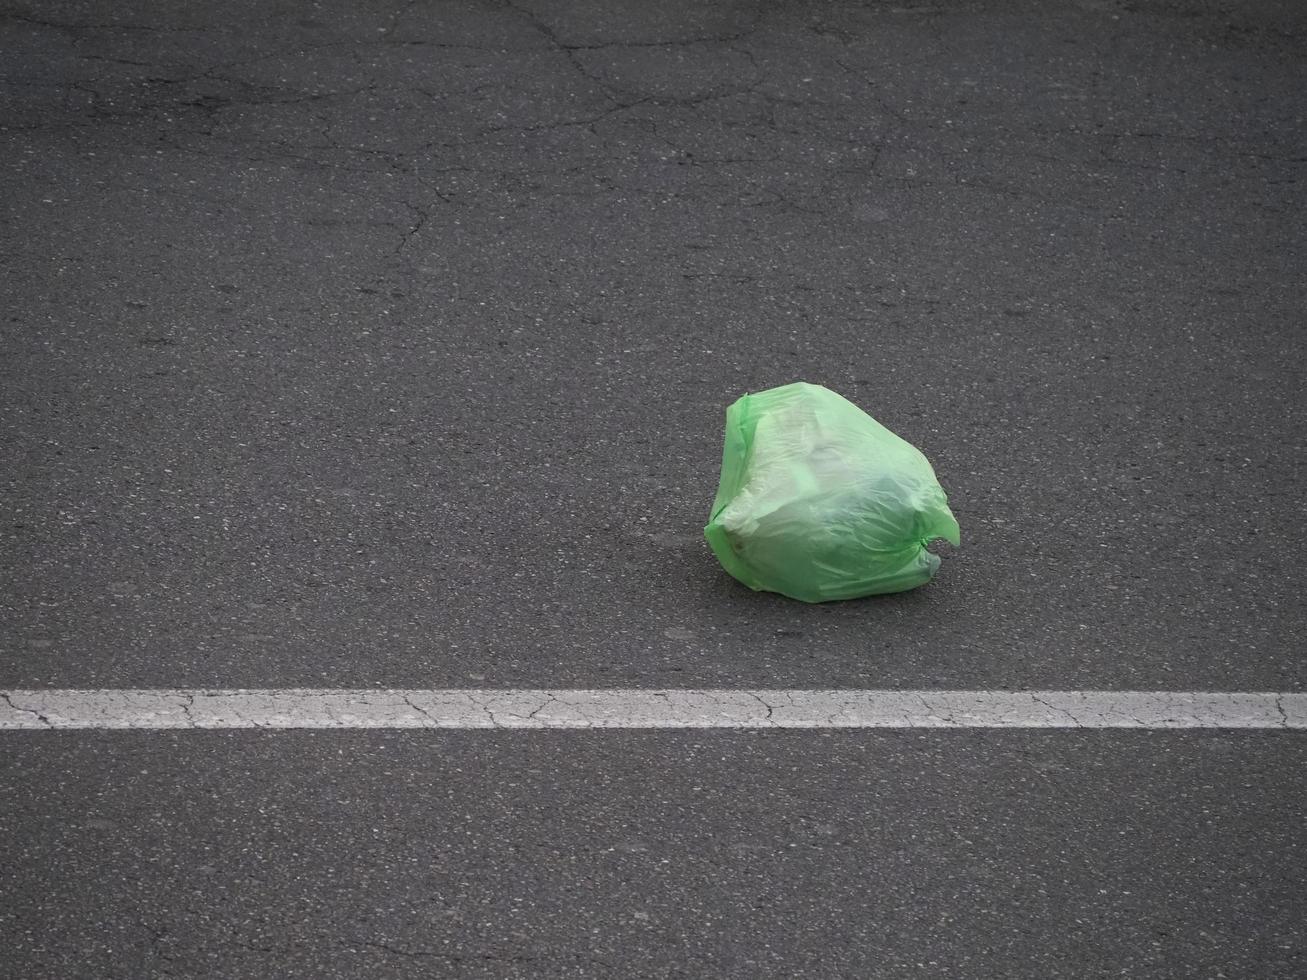 plastic bag in the road photo